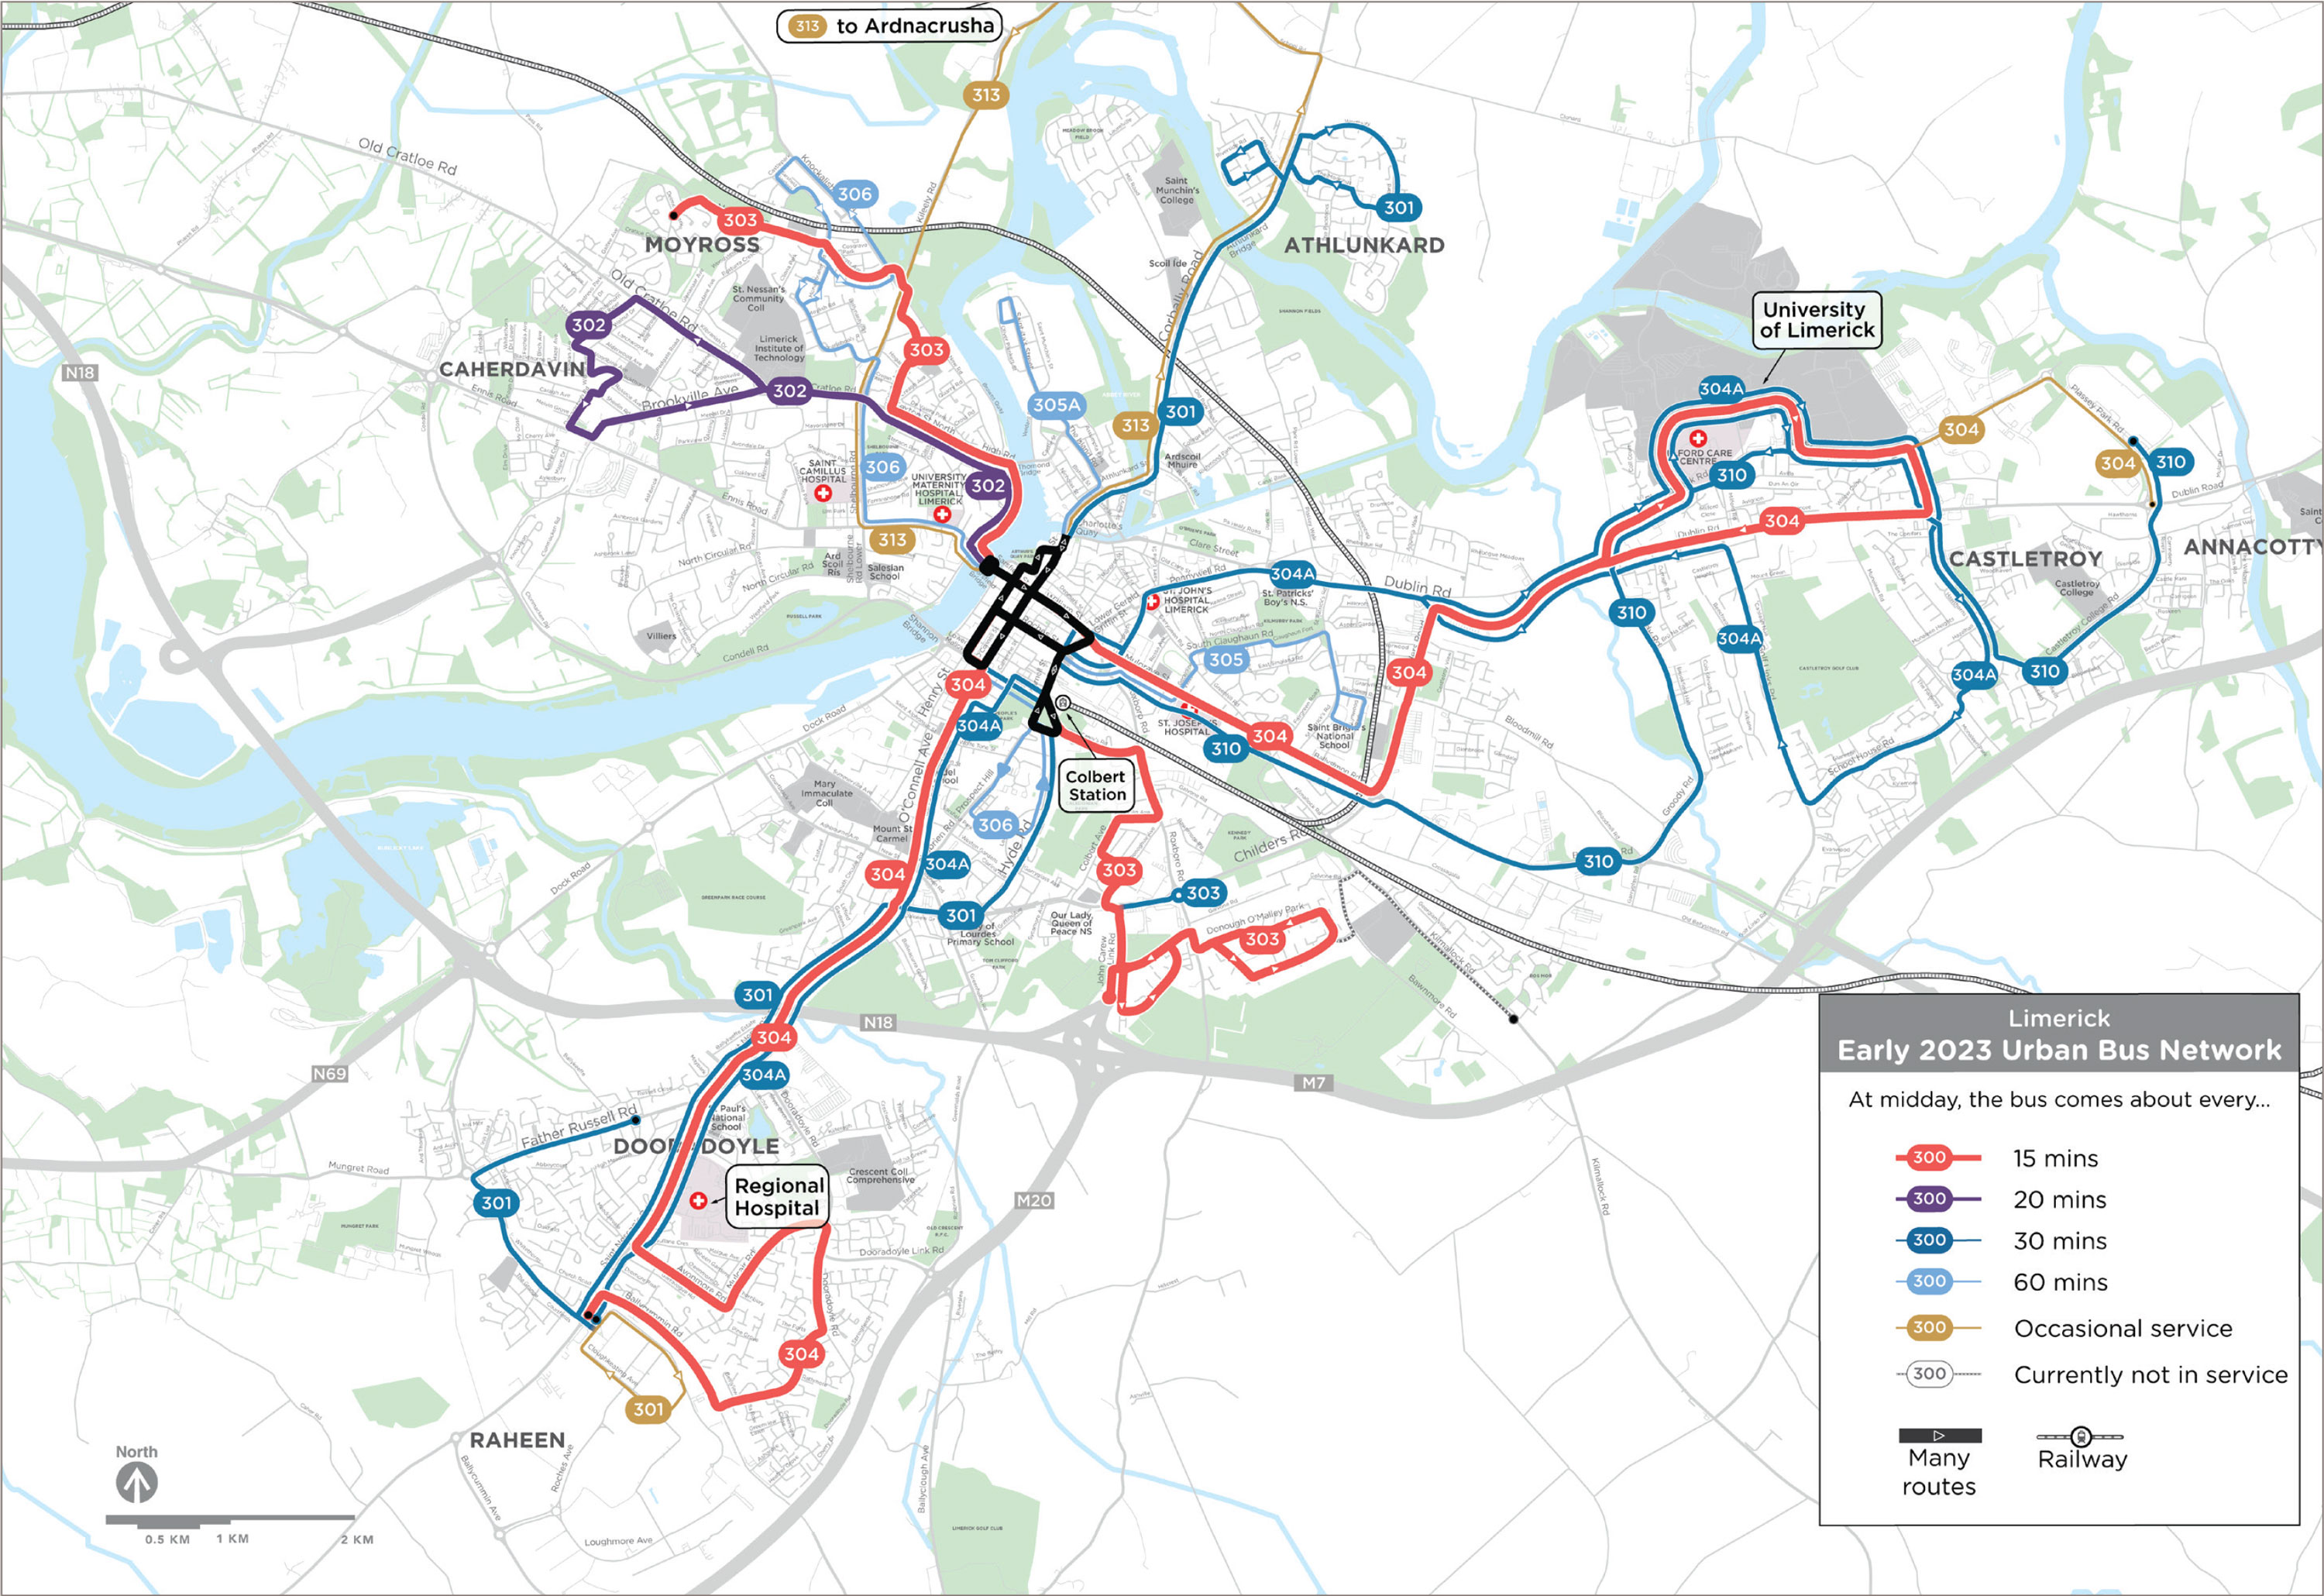 Existing Limerick Bus Network